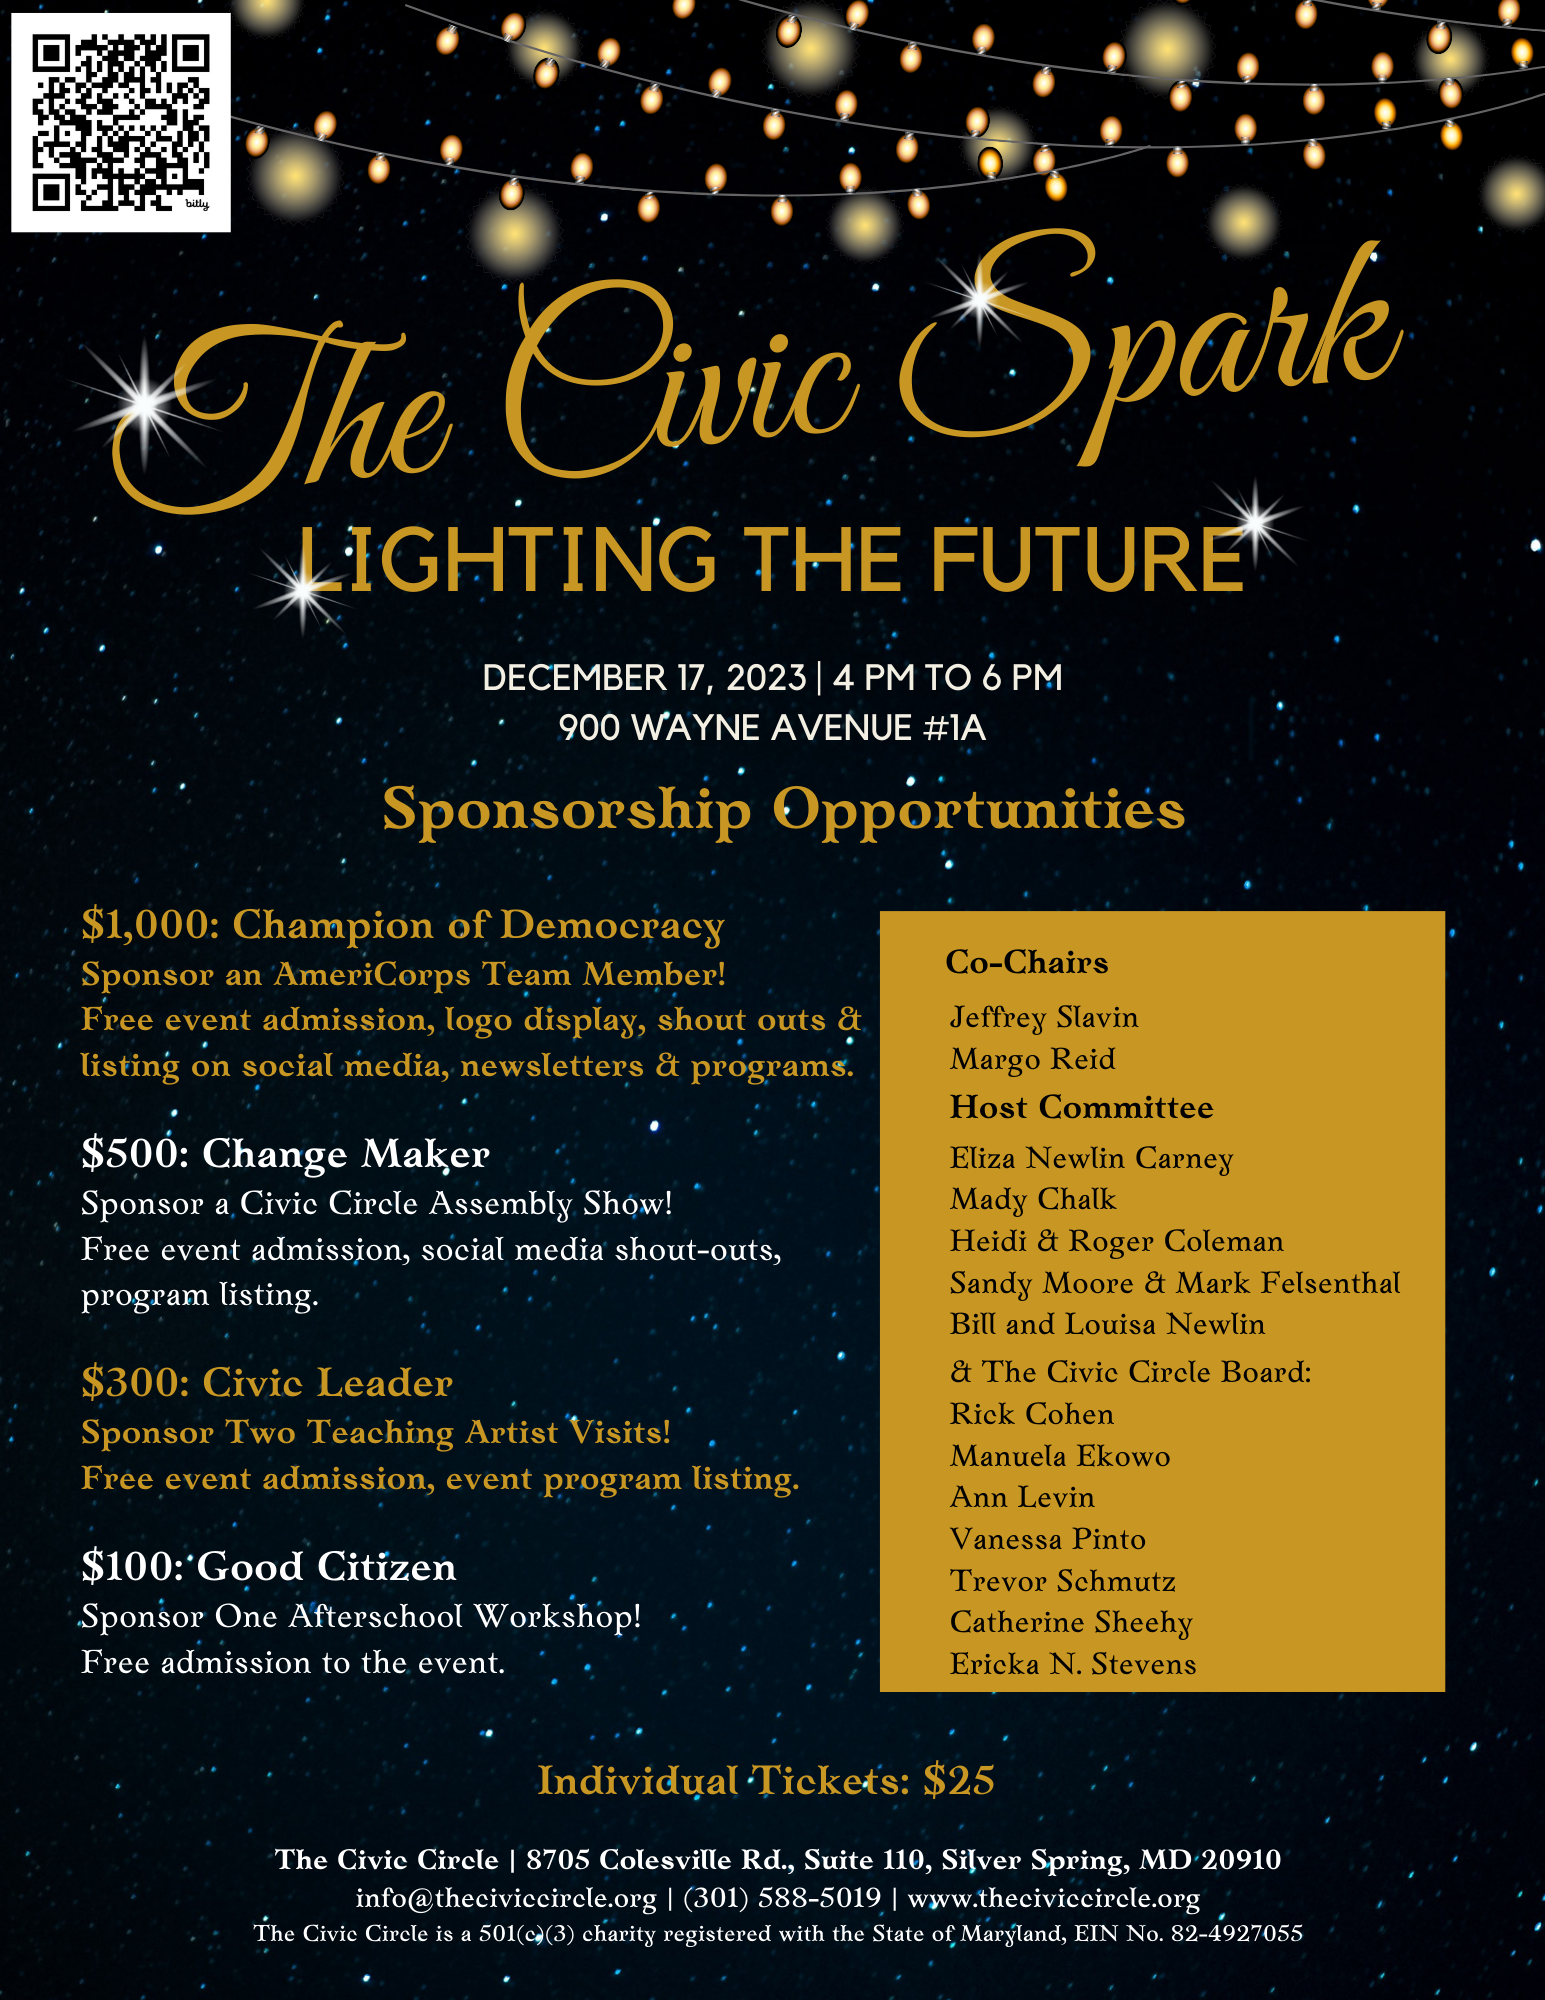 Individual tickets for The Civic Spark: $25. Event Sponsorship Opportunities: Champion of Democracy ($1000) - Sponsor an AmeriCorps Team member! Free event admission, logo display, shout outs & listing on social media, newsletters & programs. Change Maker ($500) - Sponsor a Civic Circle Assembly Show! Free event admission, social media shout-outs, program listing. Civic Leader ($300) - Sponsor Two Teaching Artist Visits! Free event admission, event program listing. Good Citizen ($100) - Sponsor Oner Afterschool Workshop! Free admission to the event. Co-chairs: Jeffrey Slavin, Margo Reid. Host Committee: Eliza Newlin Carney, Mady Chalk, Heidi & Roger Coleman, Sandy Moore & Mark Felsenthal, Bill and Louisa Newlin, & The Civic Circle Board: Rick Cohen, Manuela Ekowo, Ann Levin, Vanessa Pinto, Trevor Schmutz, Catherine Sheehy, Ericka N. Stevens. For more information, contact info@theciviccircle.org.